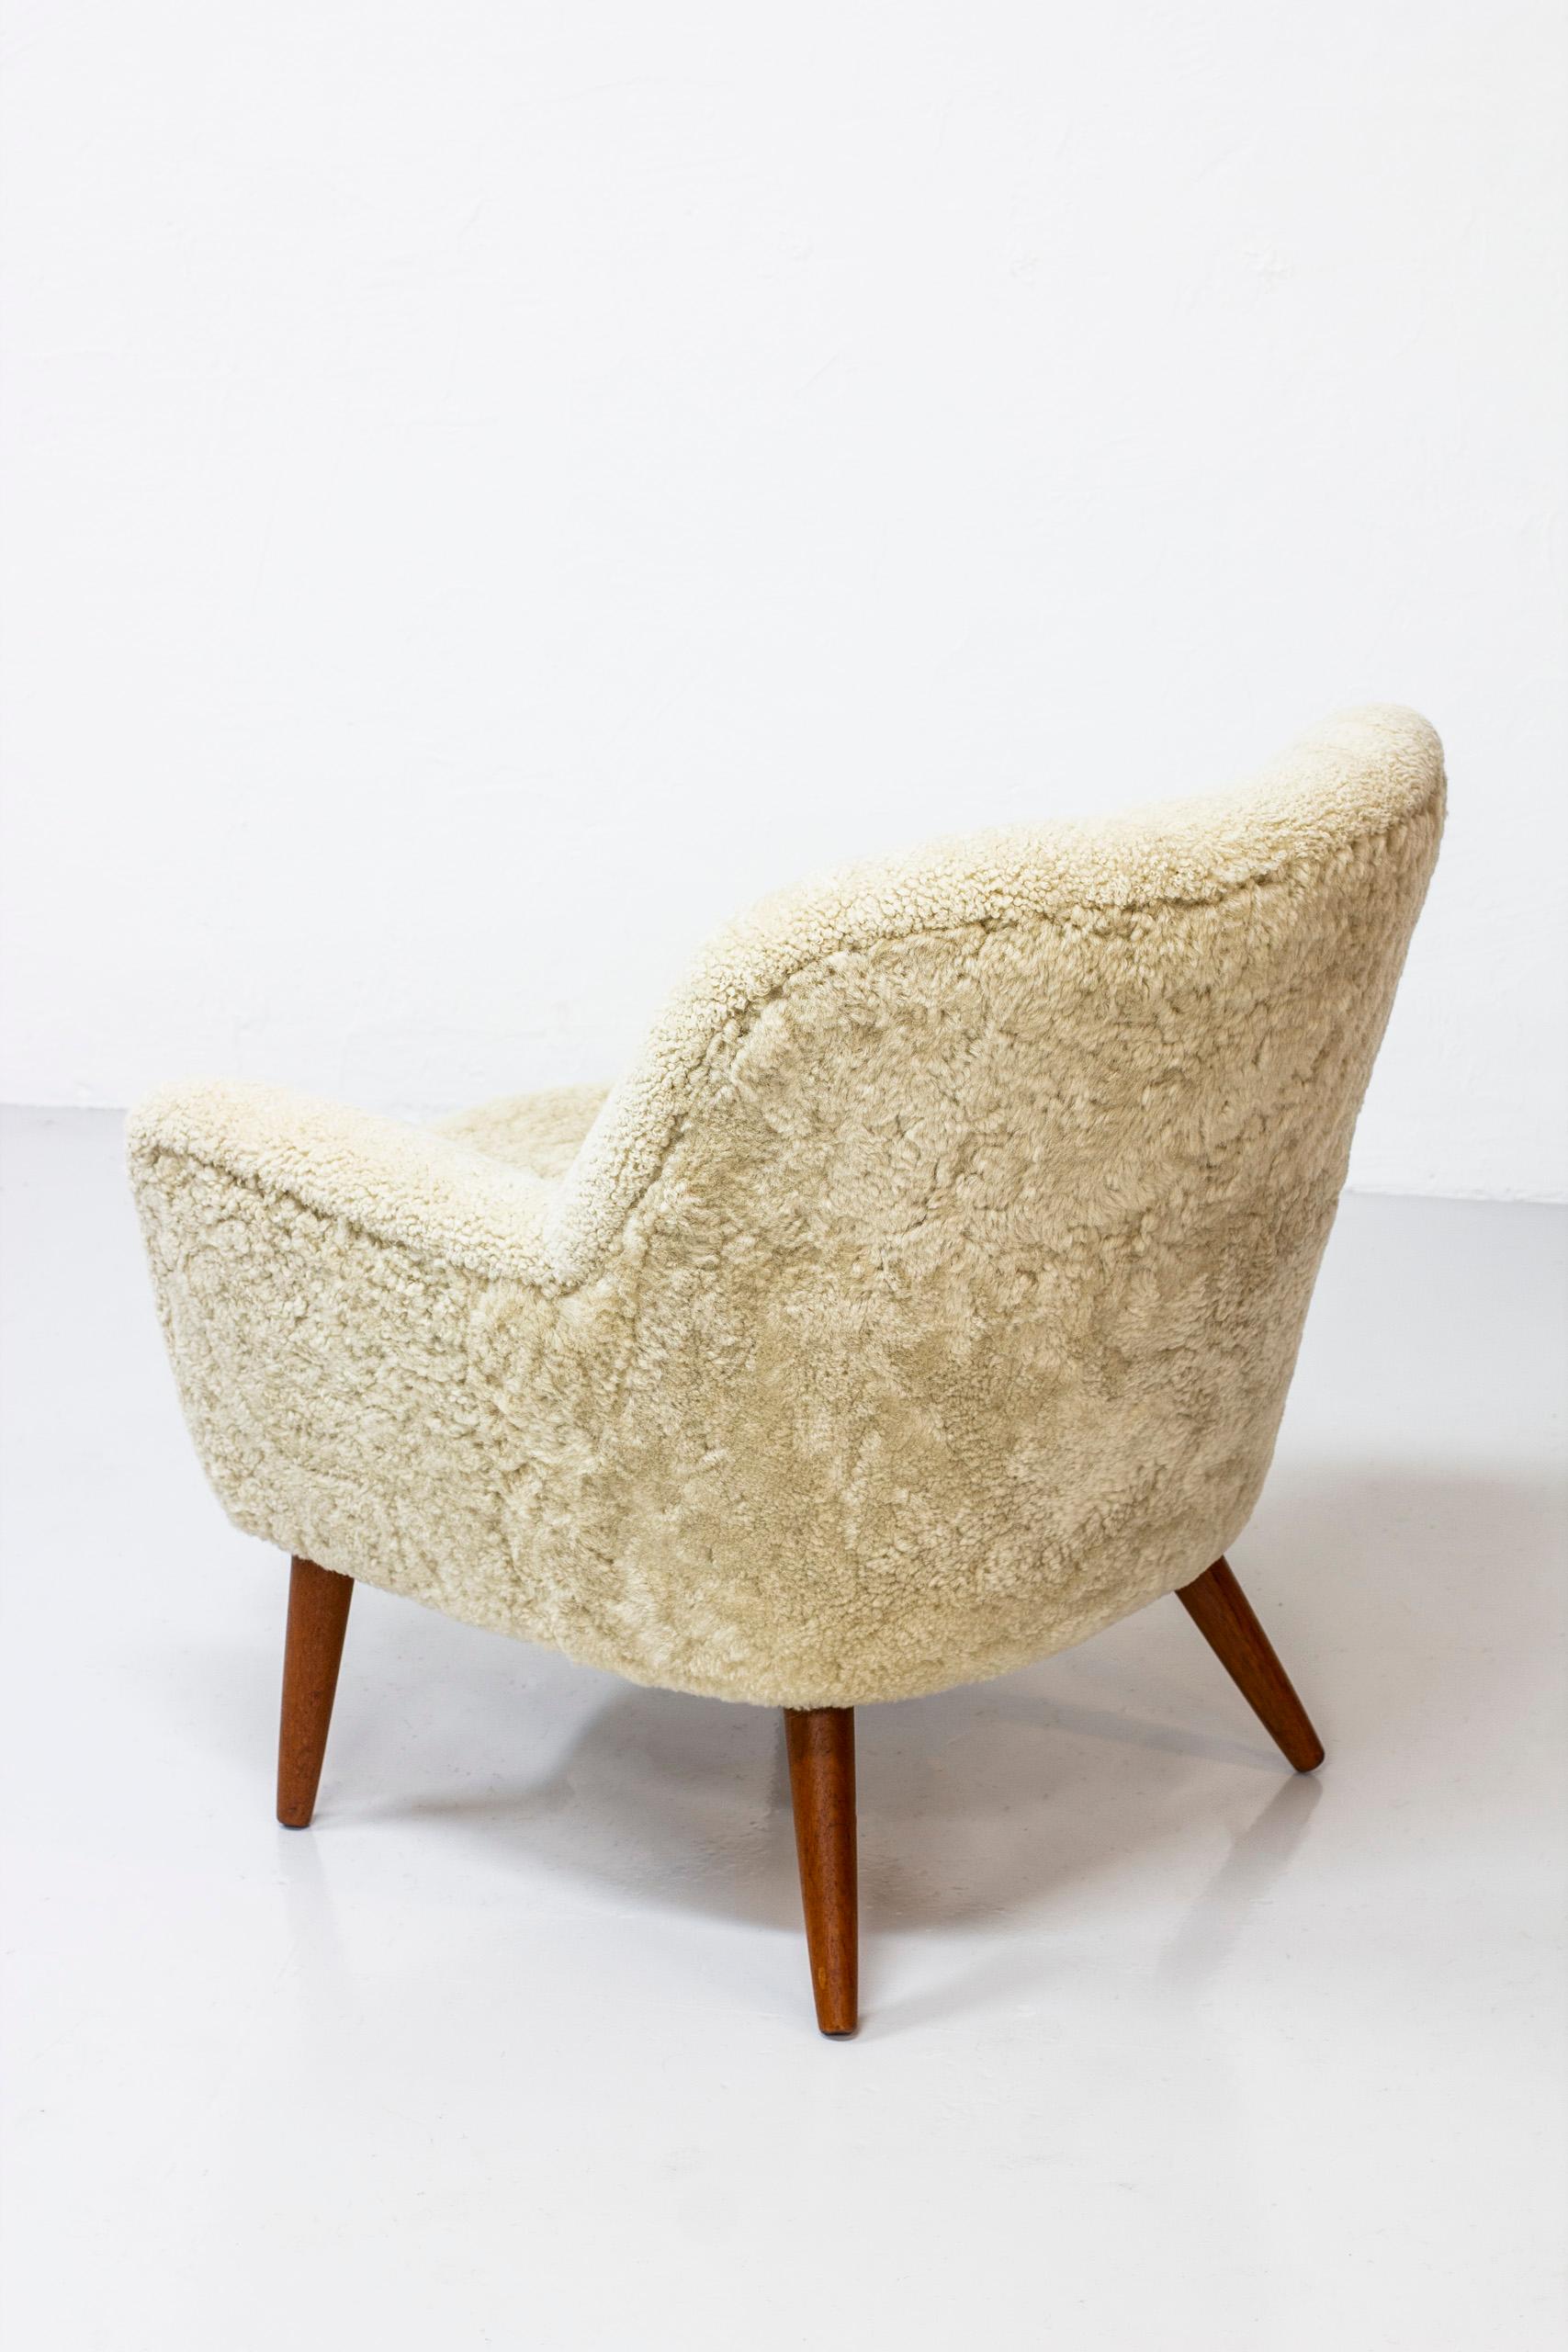 Easy chair designed by hans Olsen. produced in Denmark by N. A Jørgensens Møbelfabrik during the 1950s. Fully restored with new sheep skin upholstery in off white/light beige. Tapered legs in solid teak. Very good vintage condition with light patina